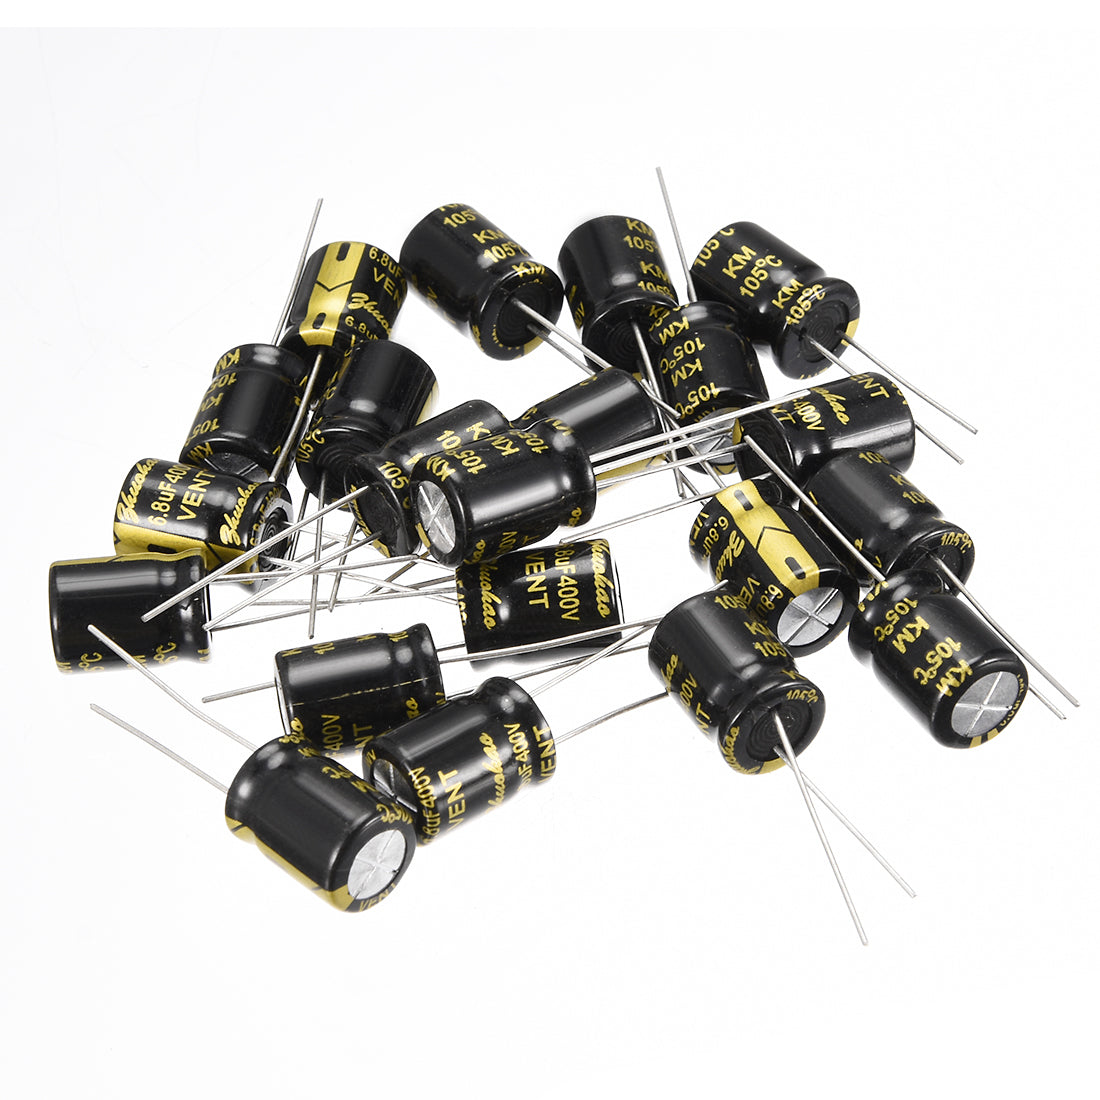 uxcell Uxcell Aluminum Radial Electrolytic Capacitor with 6.8uF 400V 105 Celsius Life 2000H 10 x 13 mm Black 20pcs